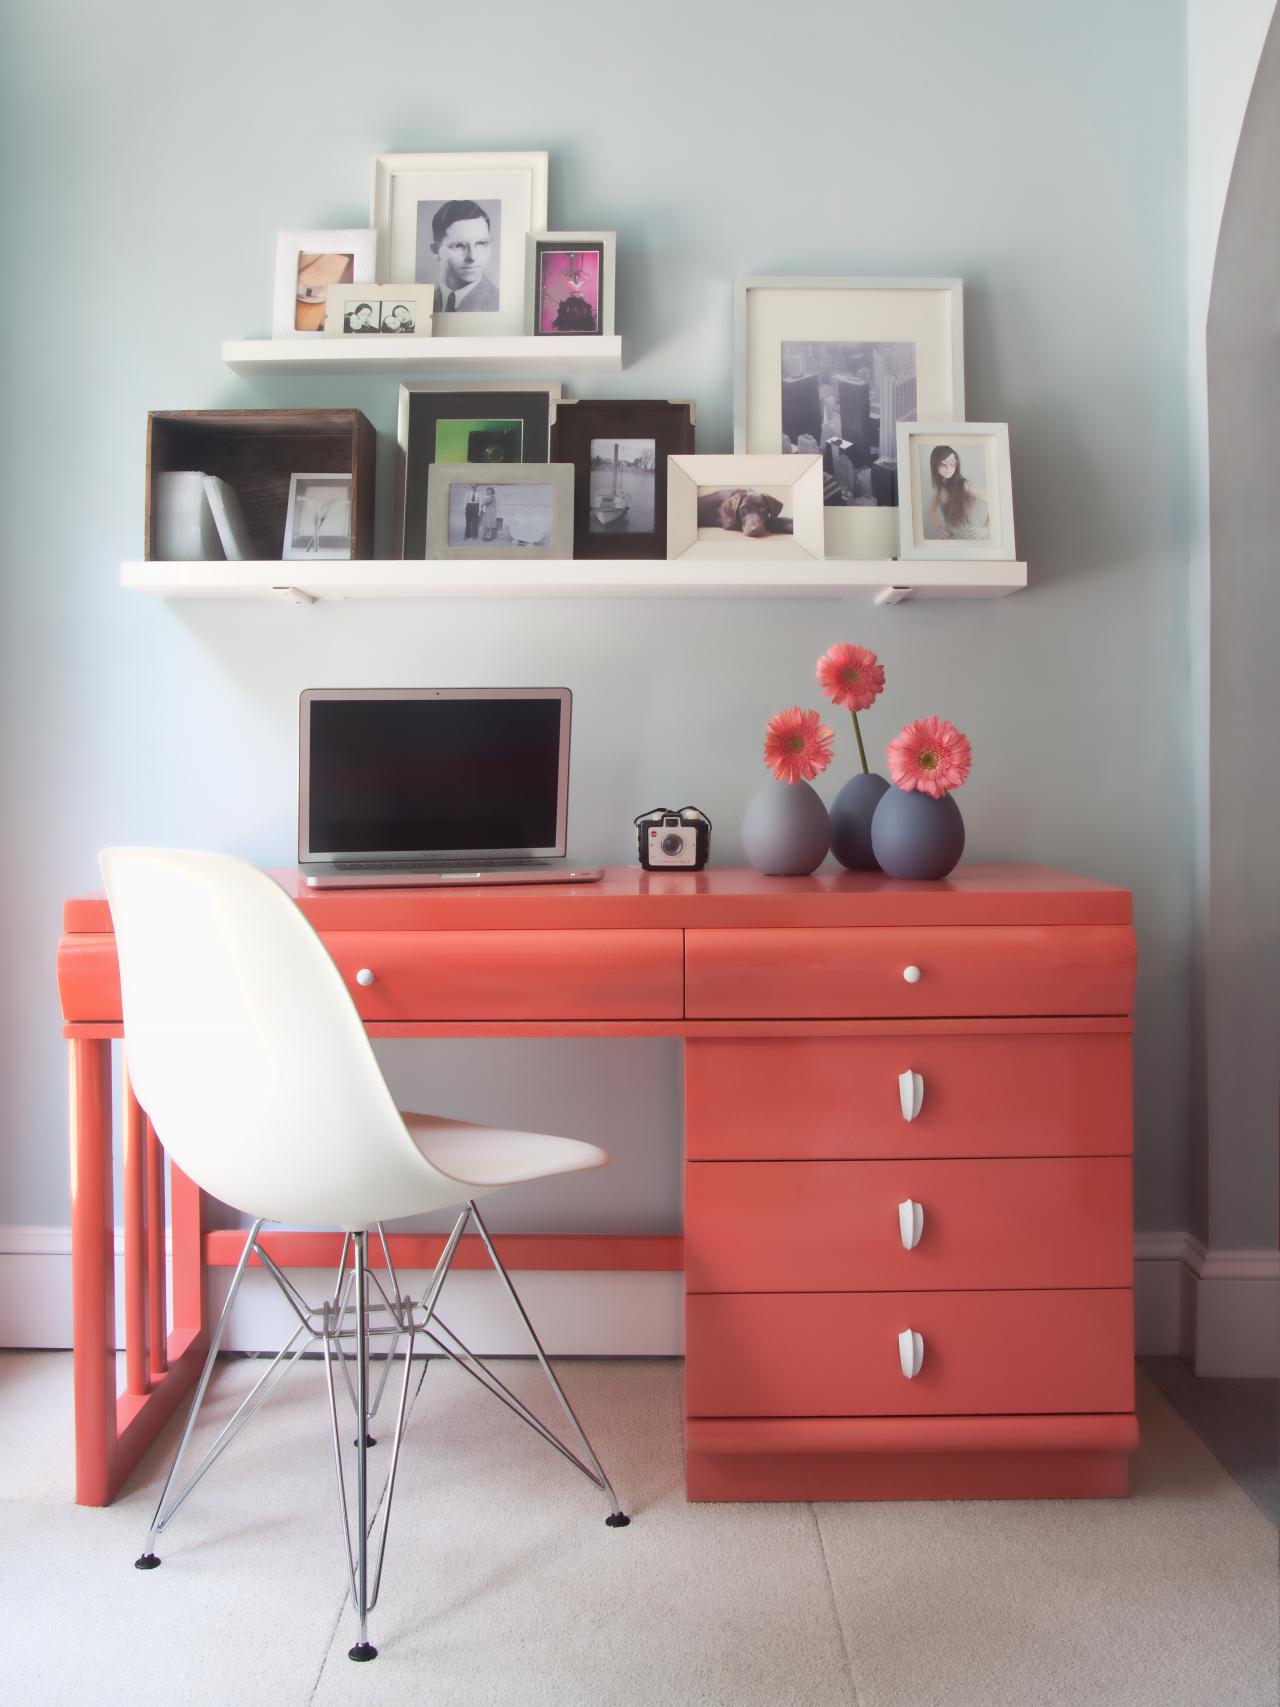 How To Paint Furniture Hgtv